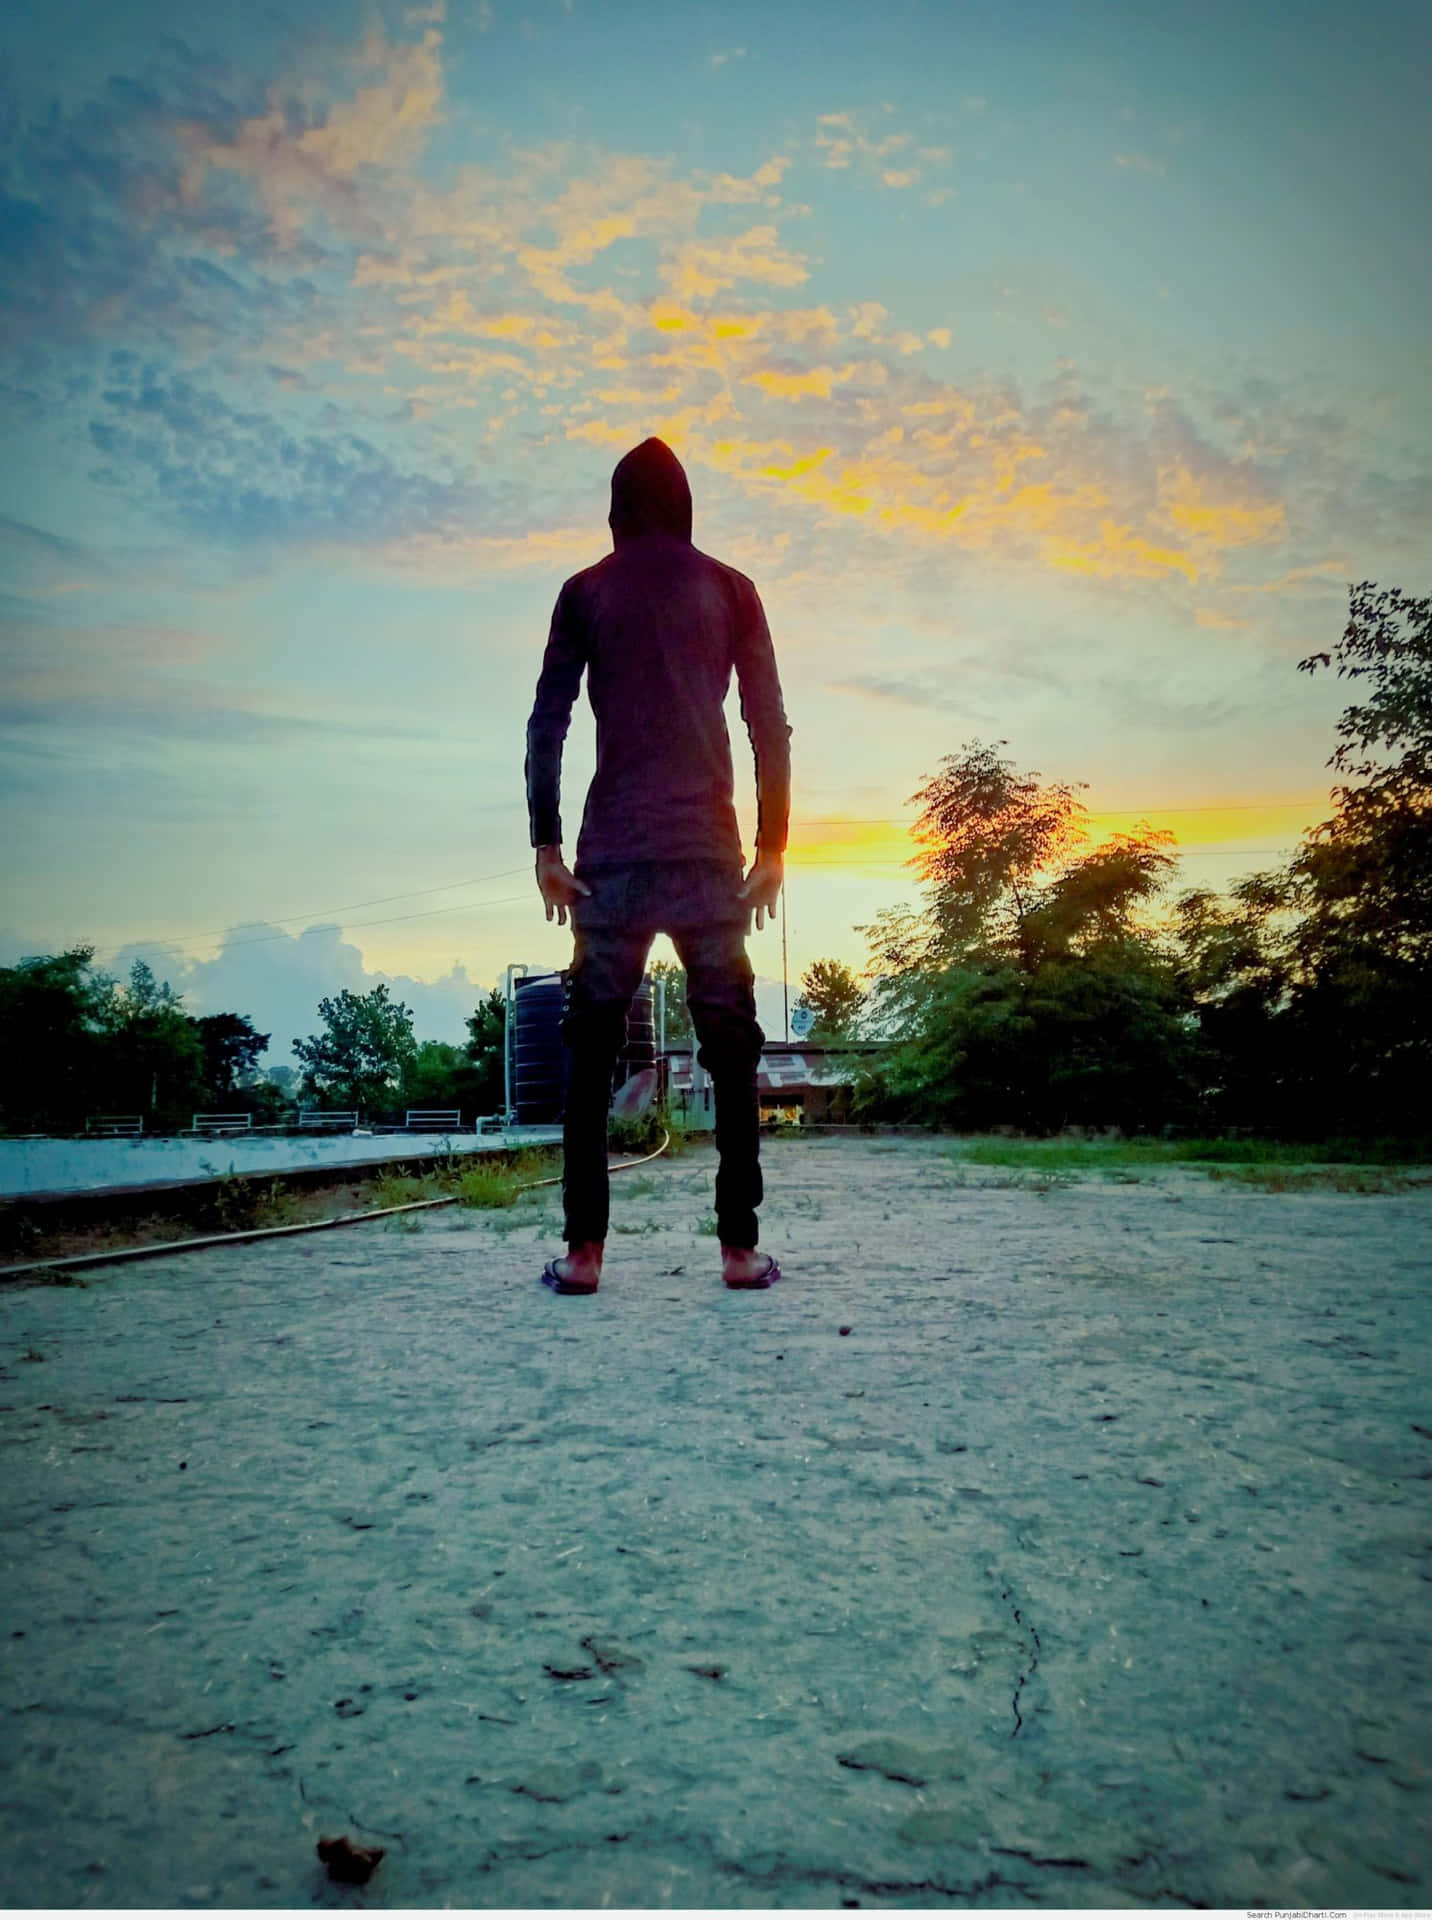 A Man Standing On A Dirt Road At Sunset